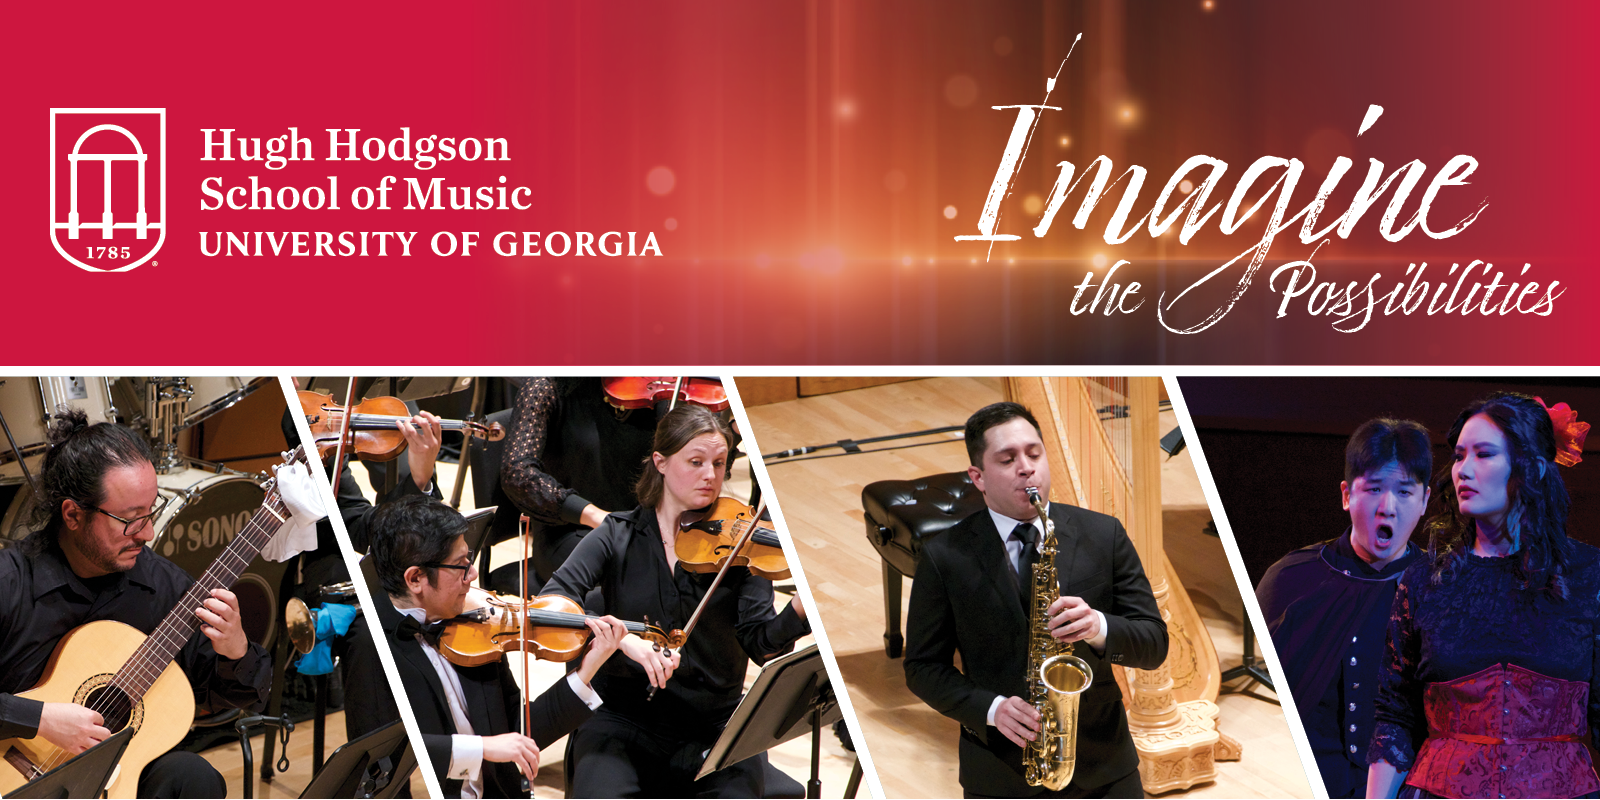 Student playing guitar, two students playing violin, one student playing saxophone, and two students singing opera underneath a logo for the Hugh Hodgson School of Music and the tagline "Imagine the Possibilities."